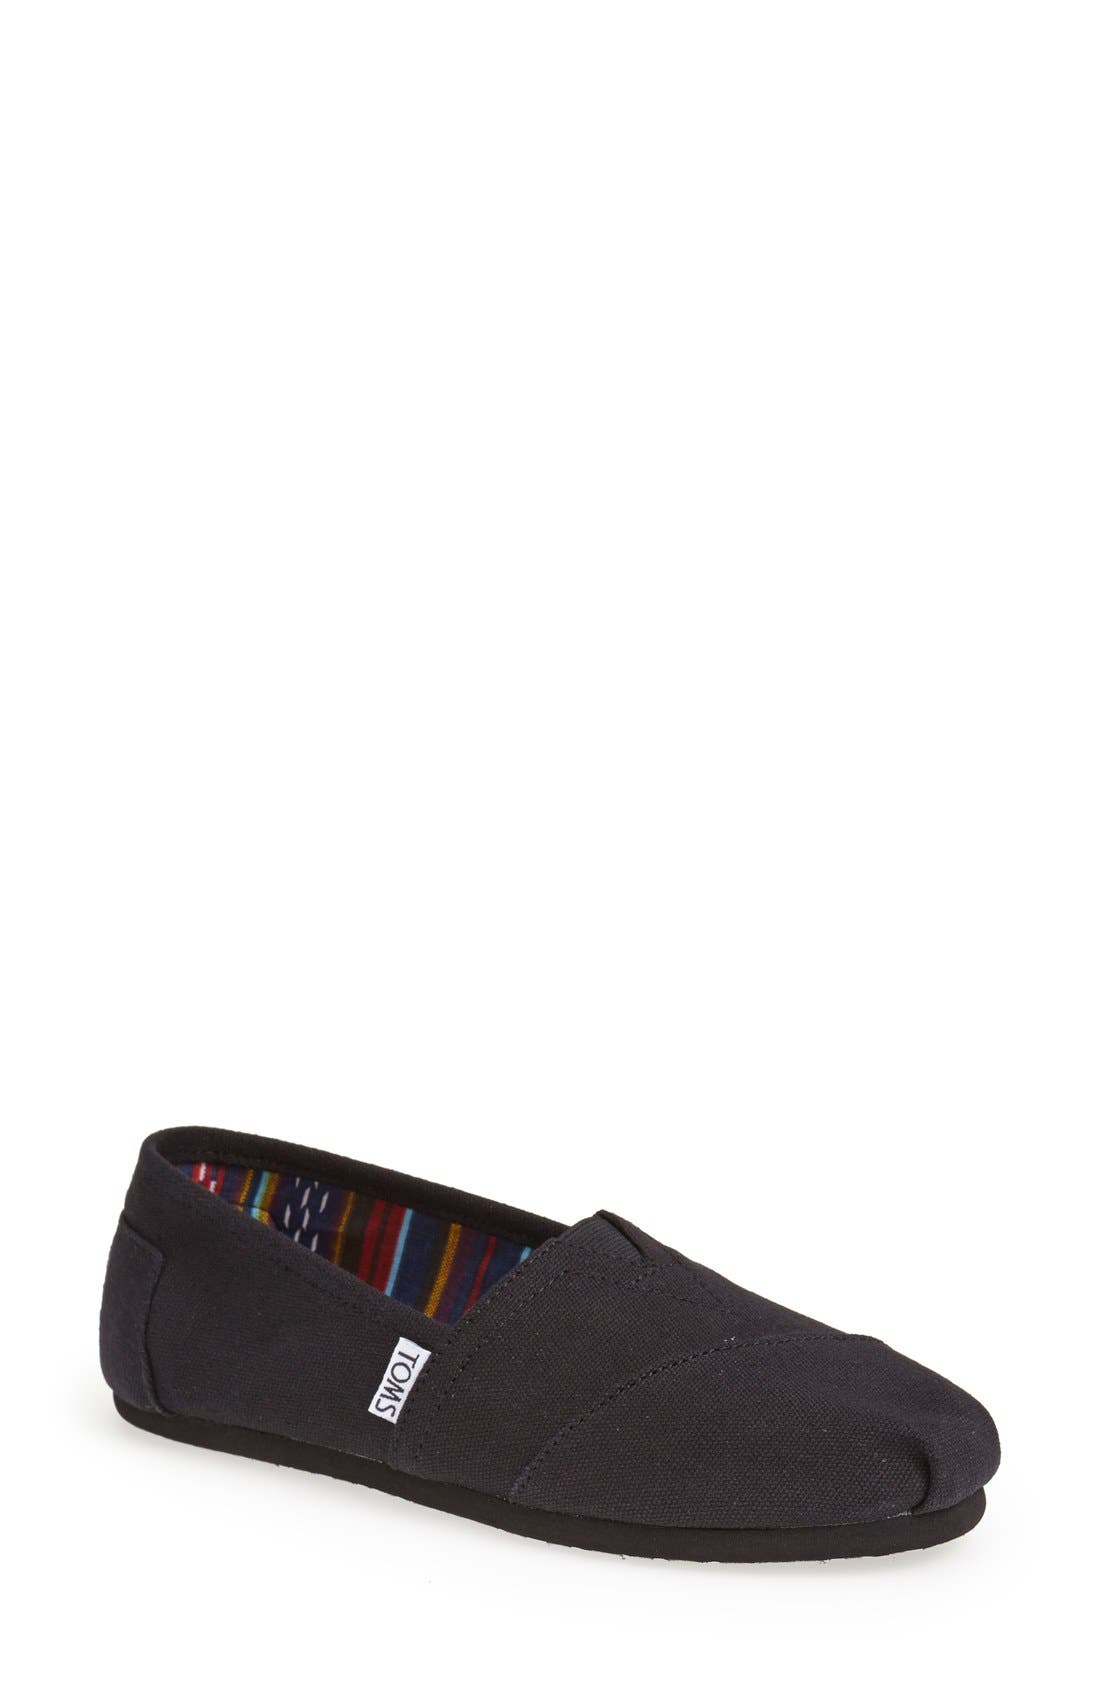 toms womens slippers sale